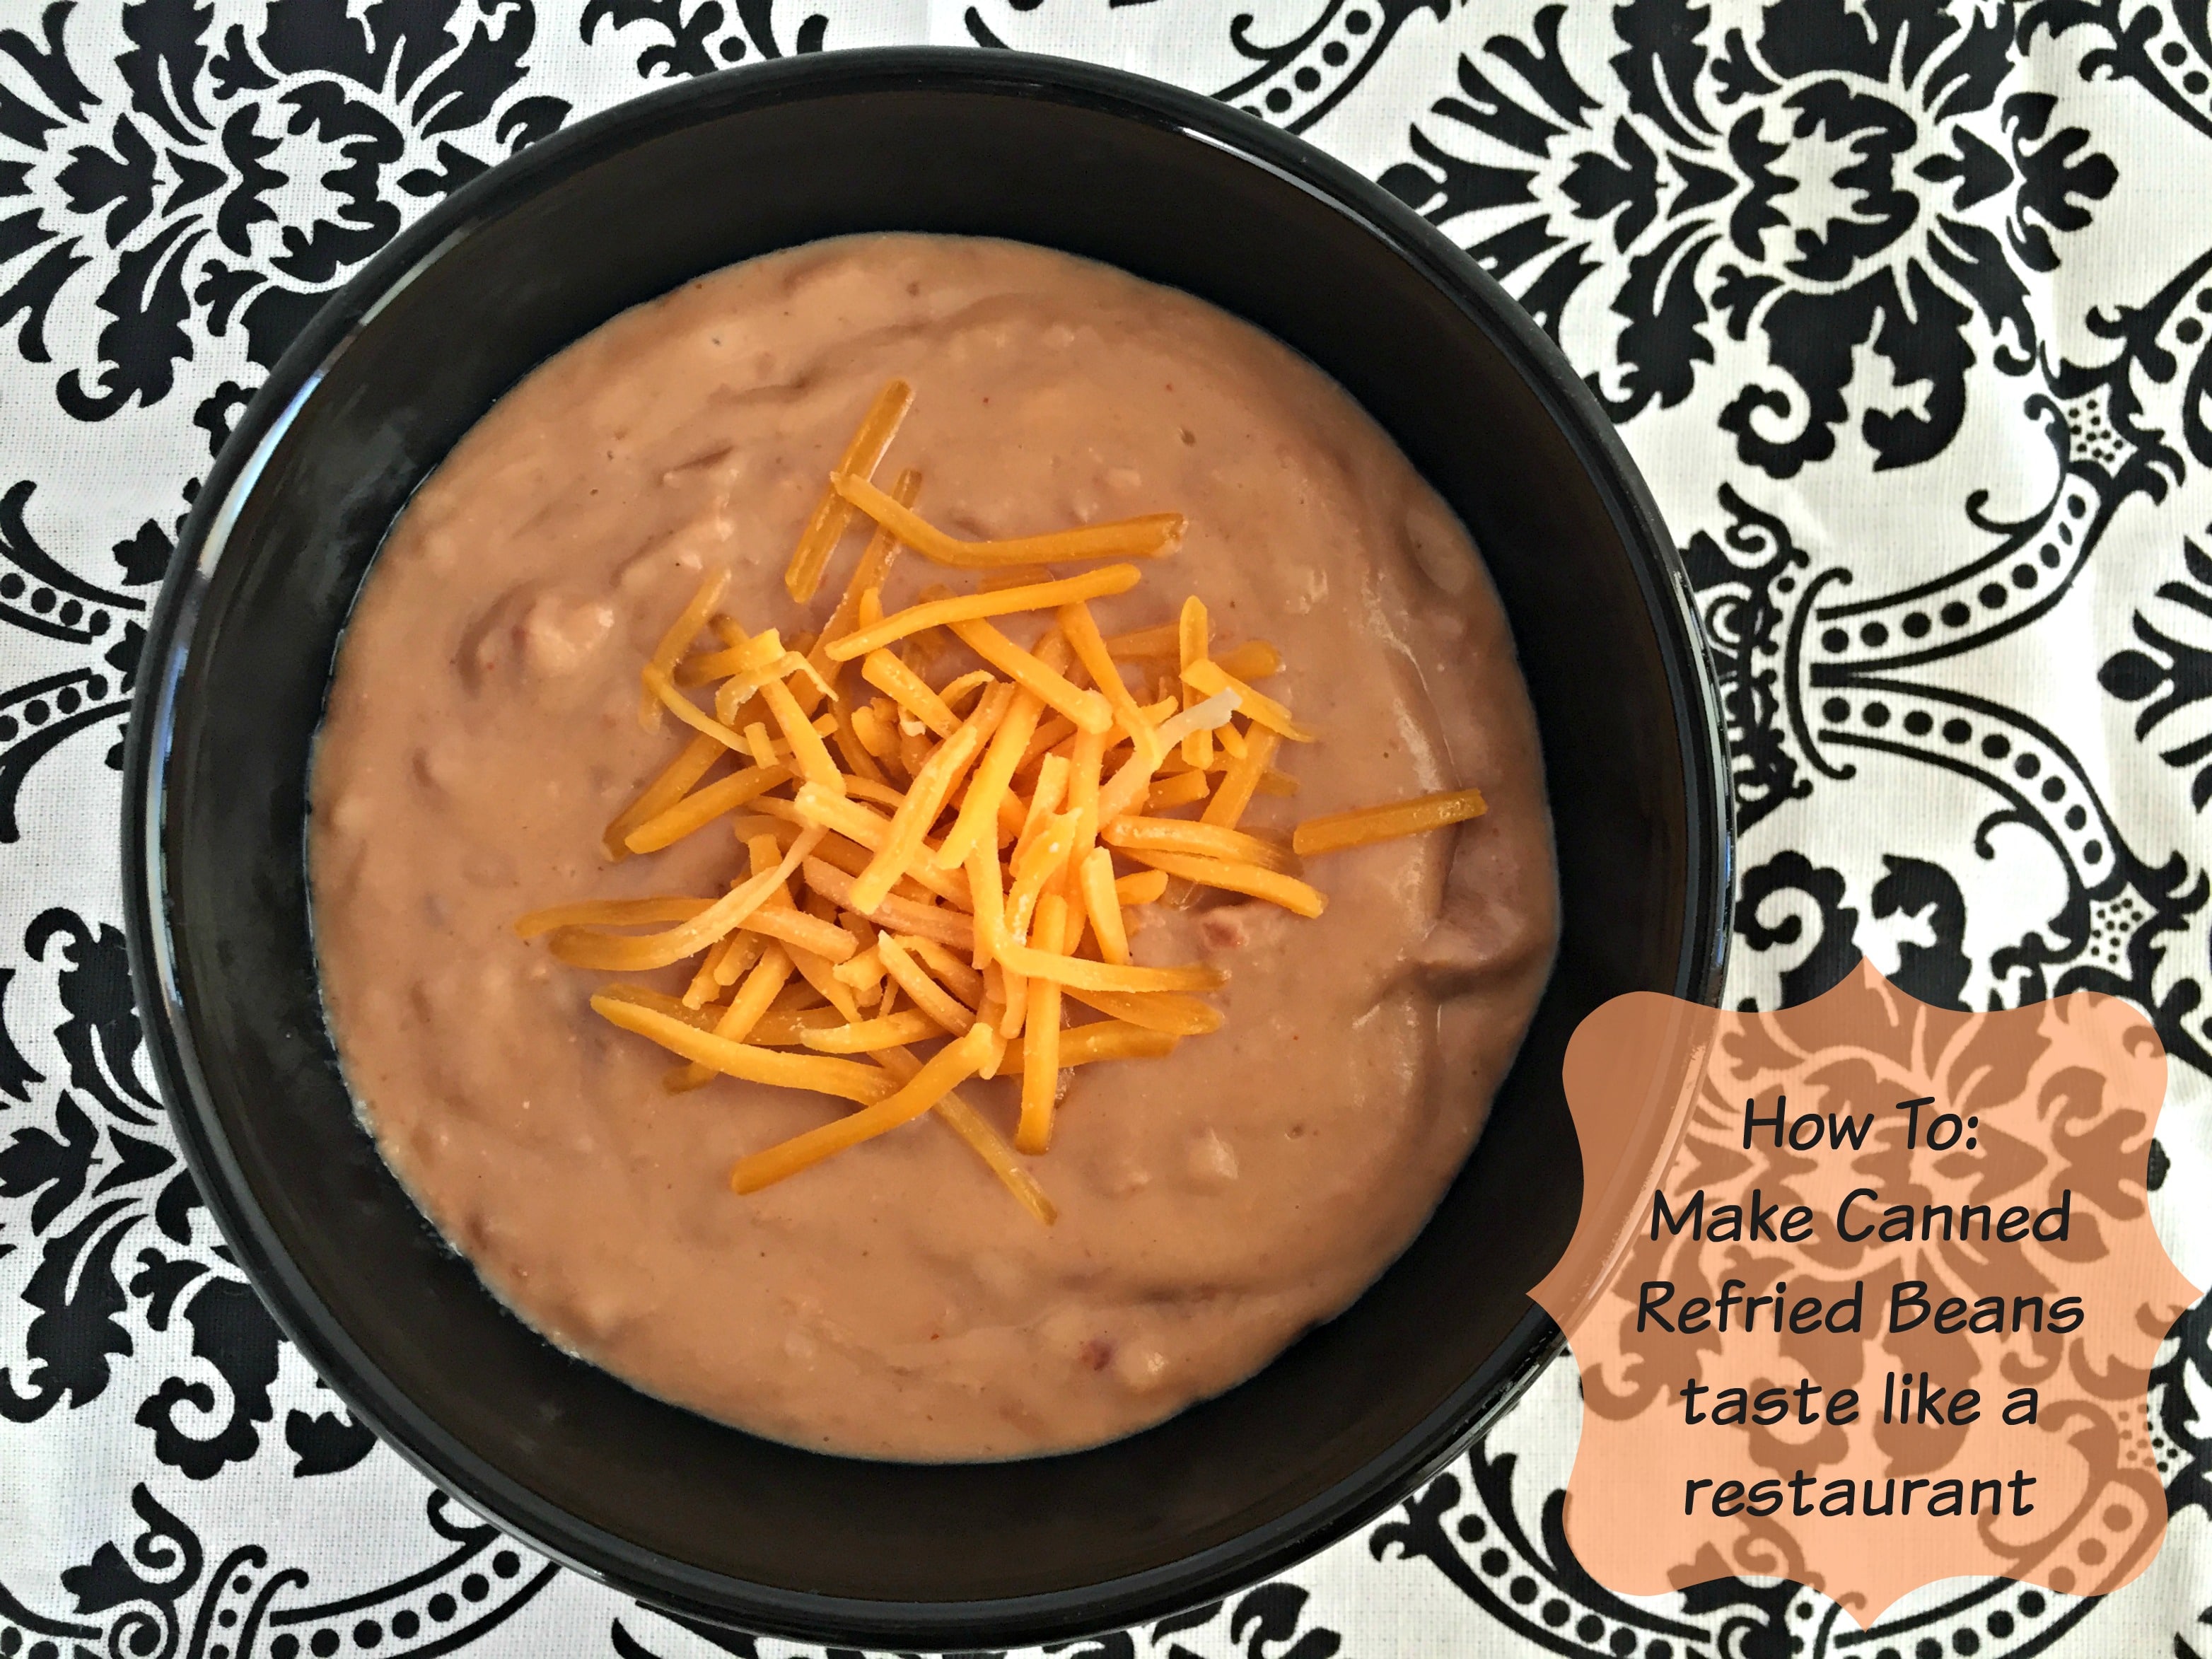 How To Make Canned Refried Beans Taste like a Restaurant's An Affair